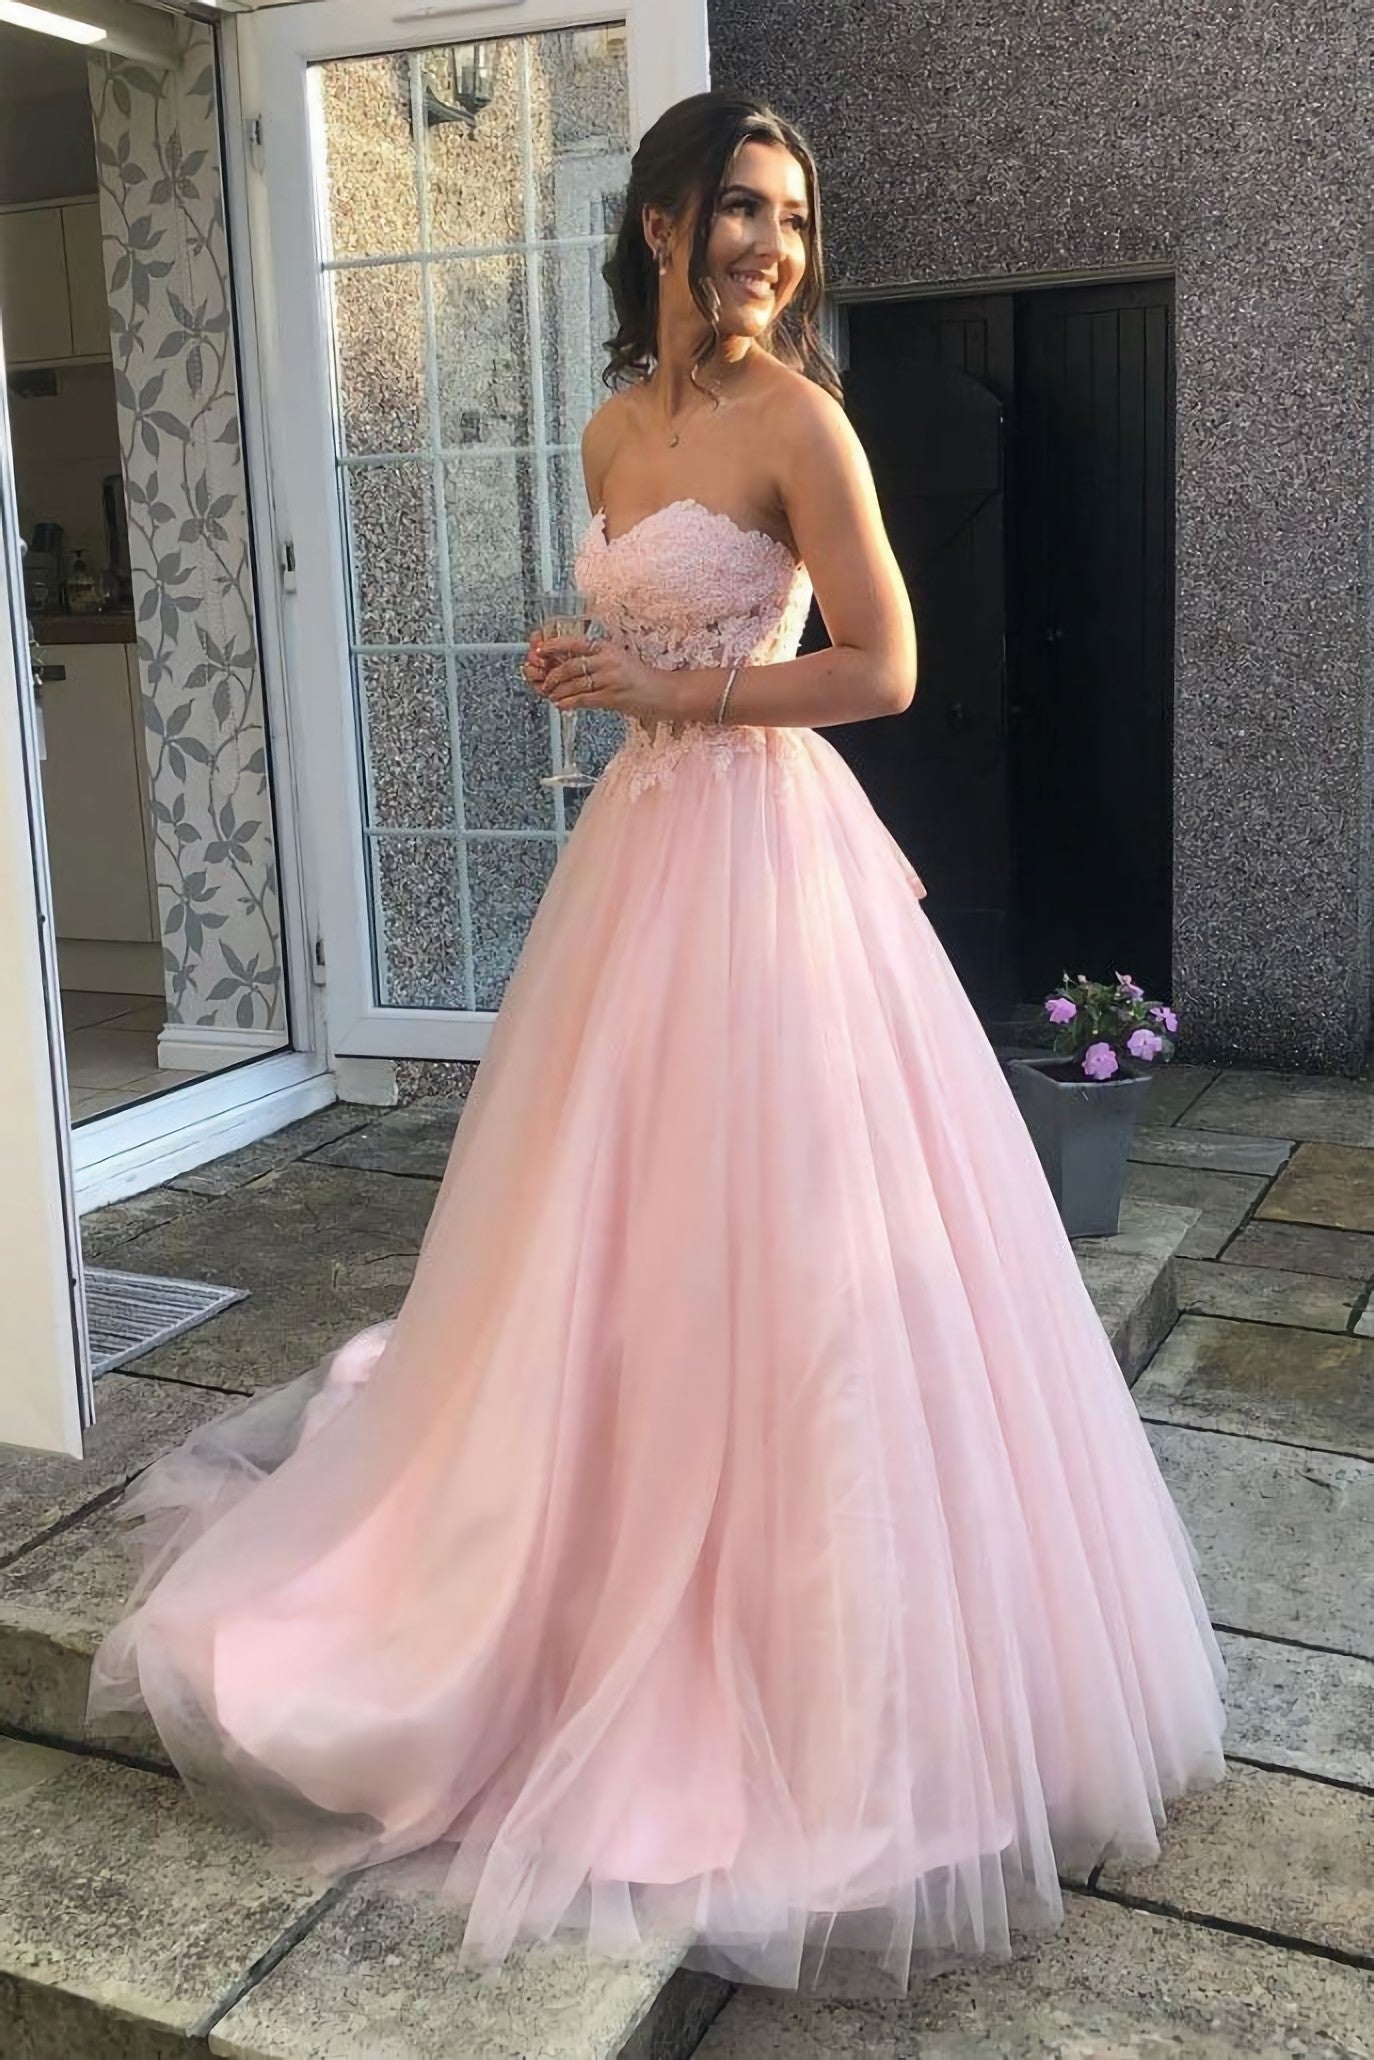 Sweetheart Lace Top Tulle Pink Long Prom Dress Pink Formal Gown